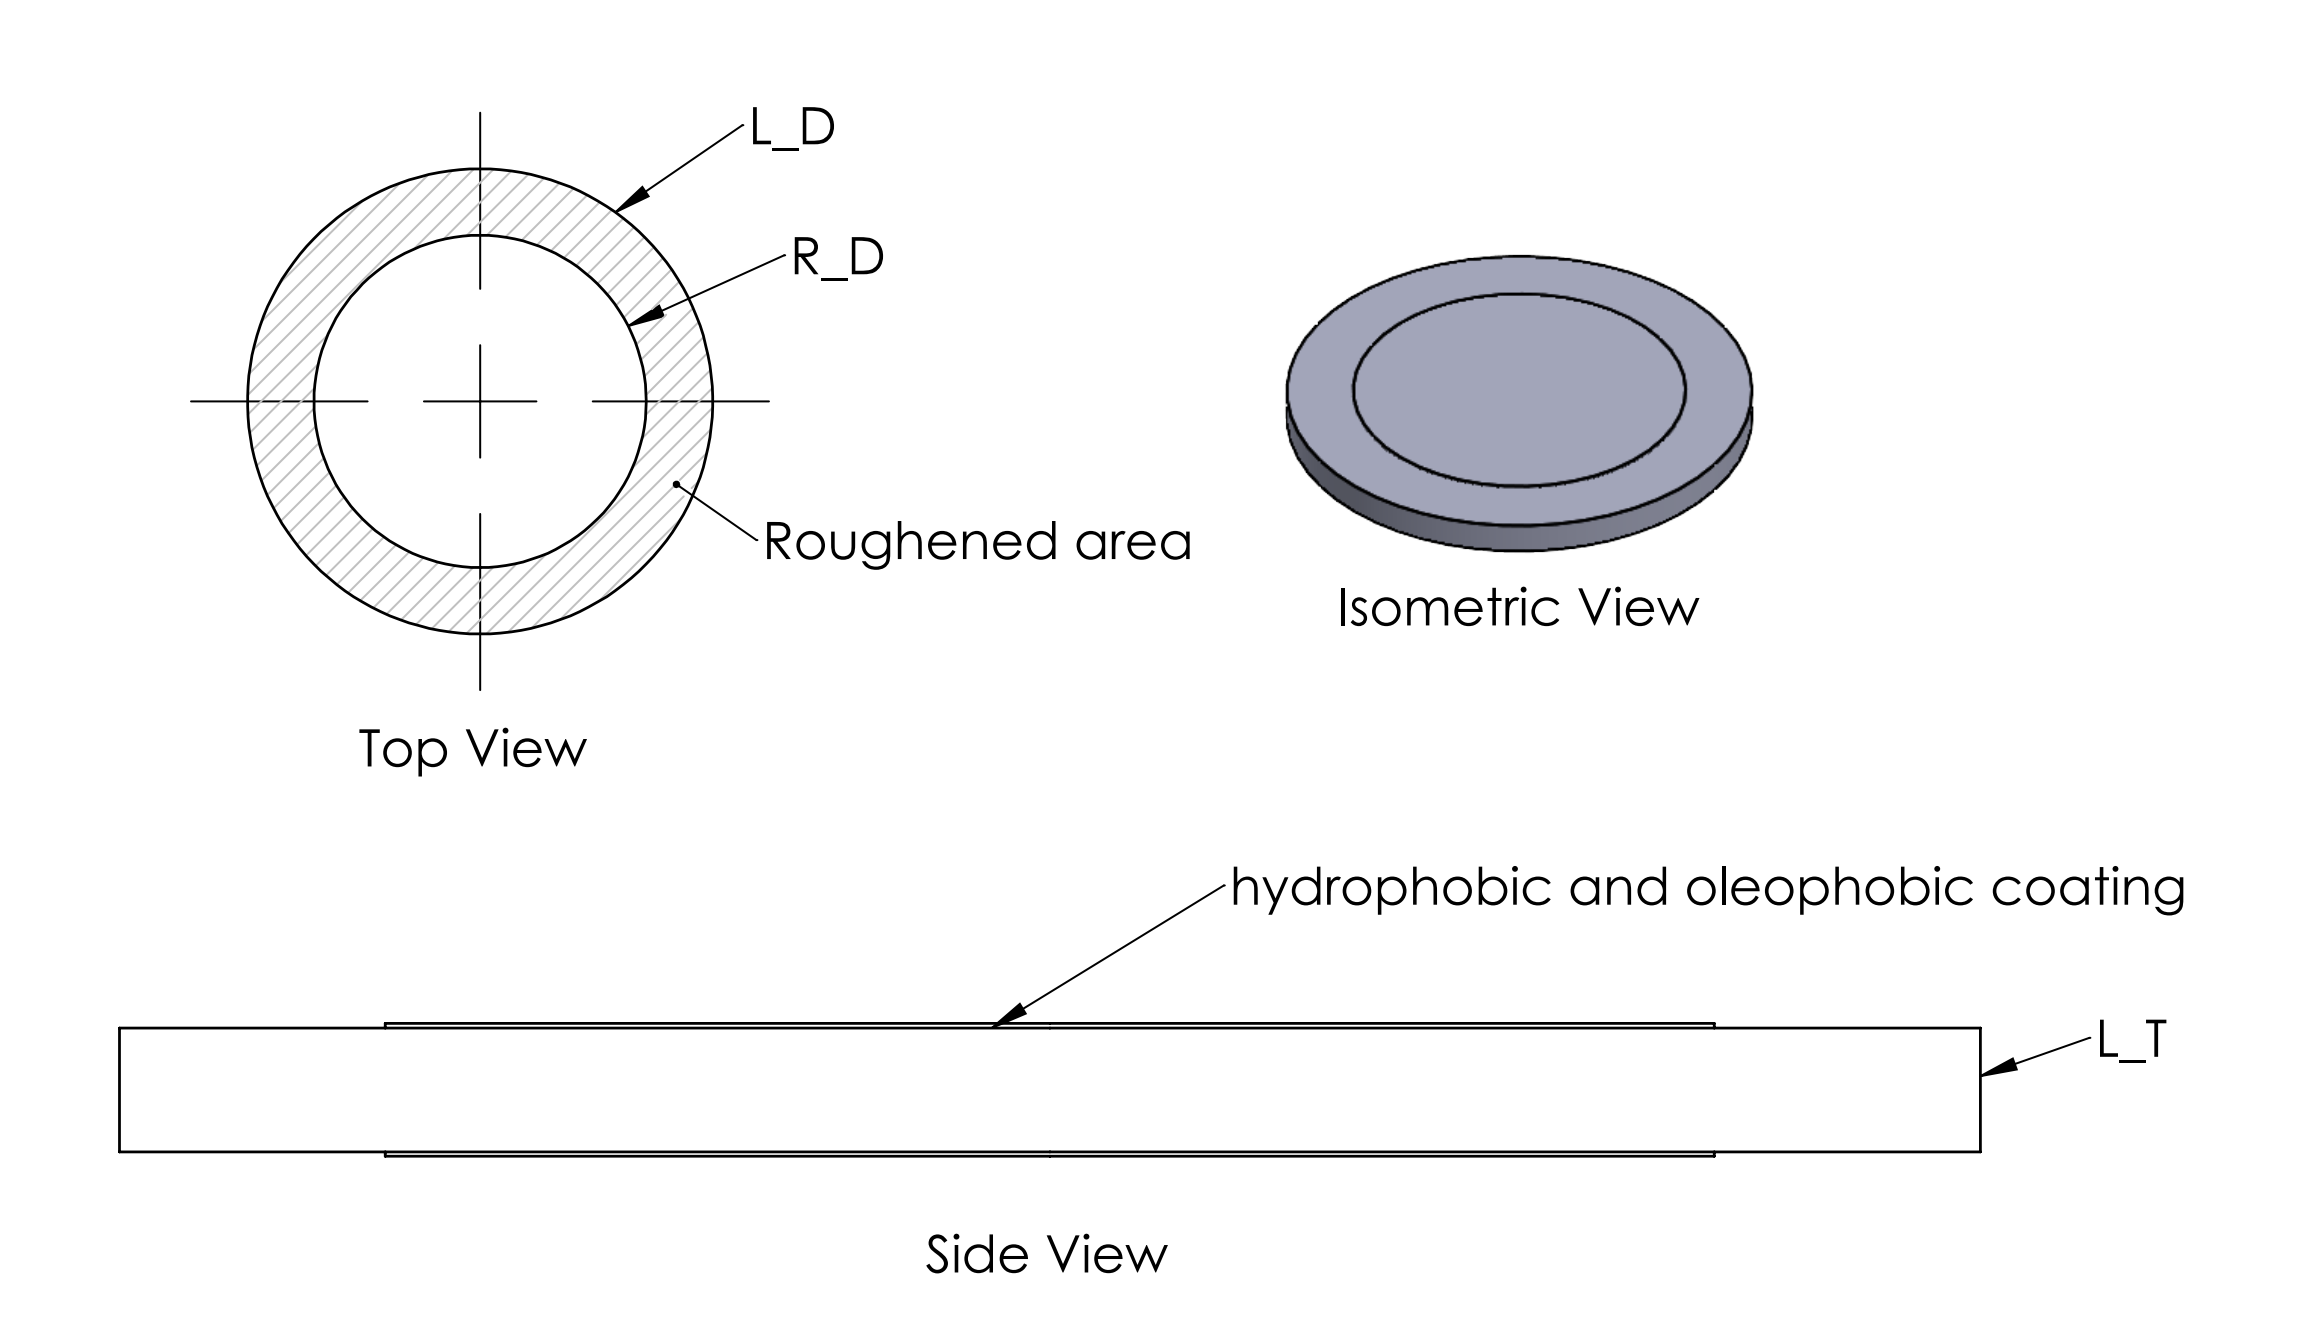  Lens: Top View, Side View and Isometric View 